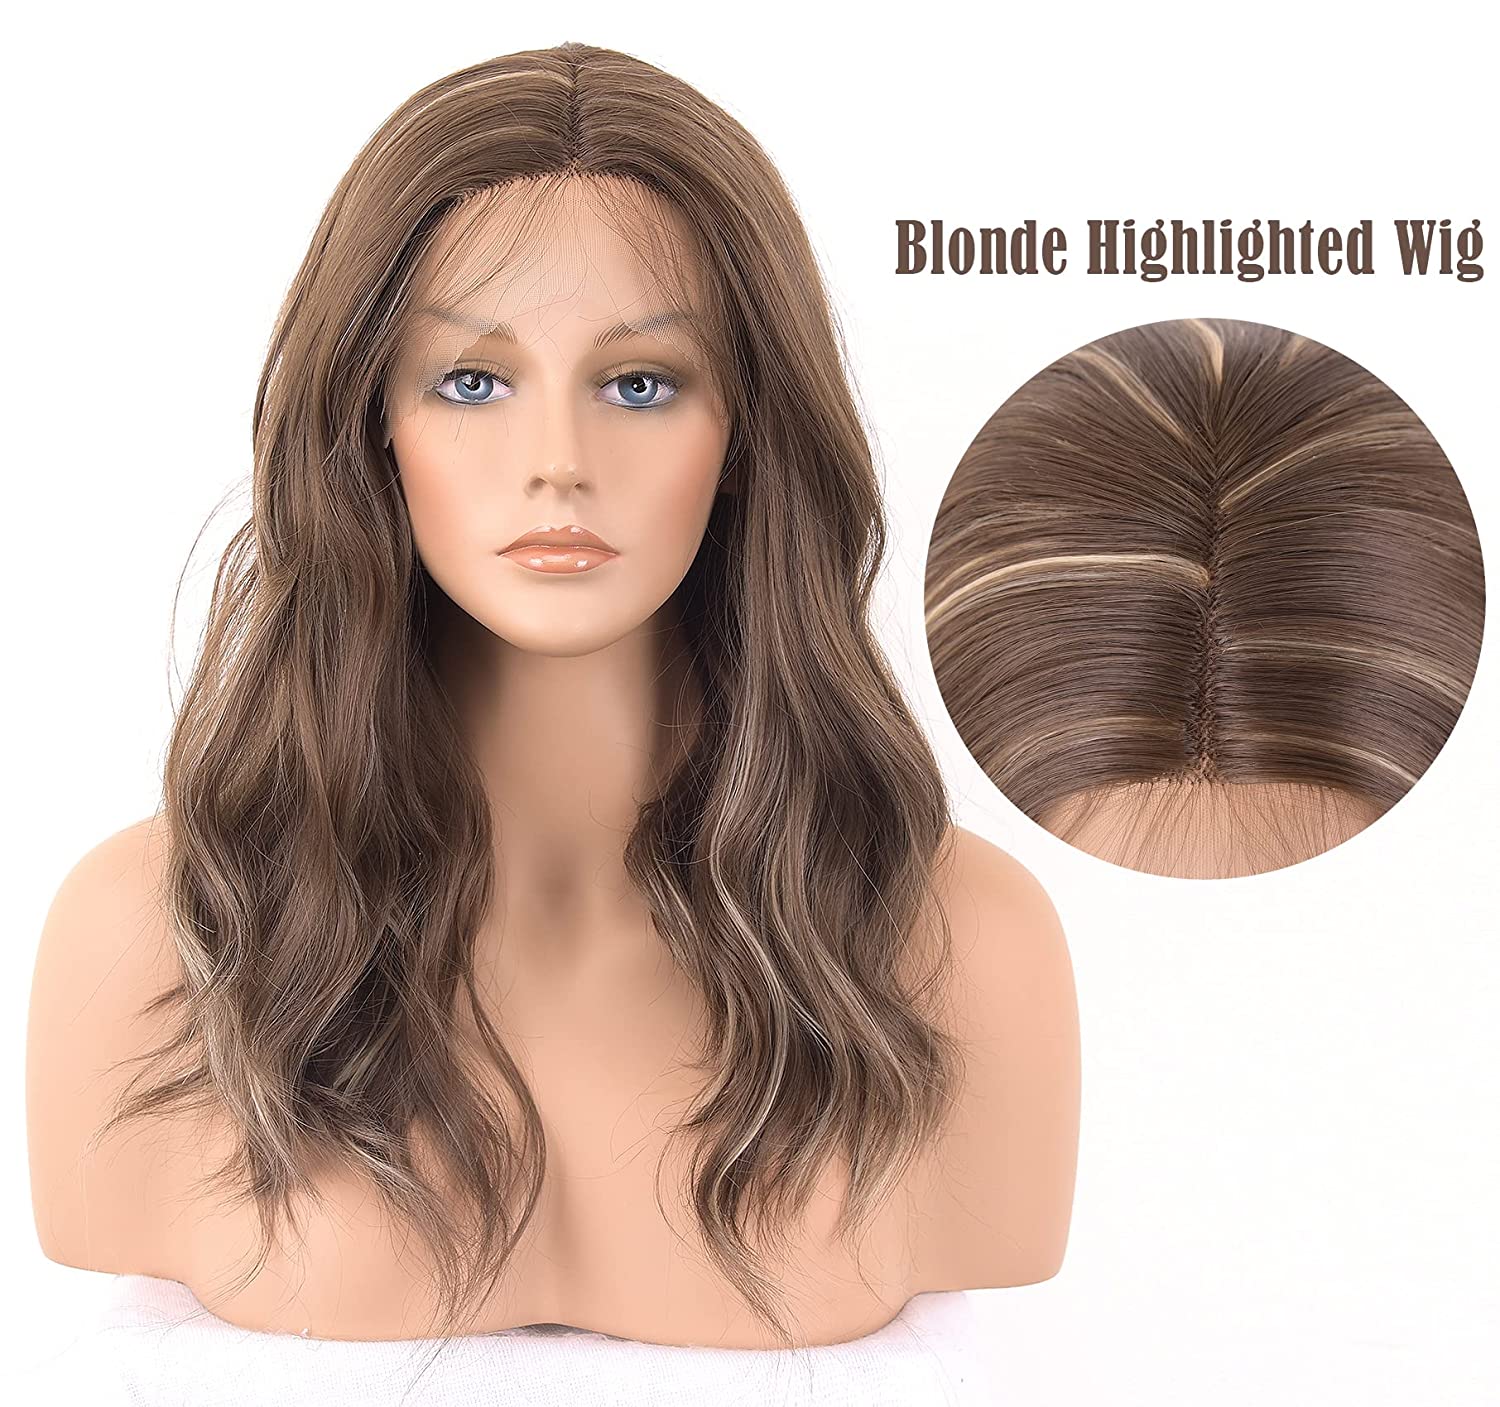 wavy blonde wig,brown highlight wig,highlight lace wig → lace front wigs,light brown wig,best synthetic lace front wigs,water wave wig,wavy bob wig,highlighted wig,synthetic wigs for women,brown hair wig,lace front wigs for women → body wave wig,lace synthetic wig,body wave lace front wig,afro wigs for women,brown wigs for women,brown lace wig,womens lace front wigs,synthetic wigs,wave wig